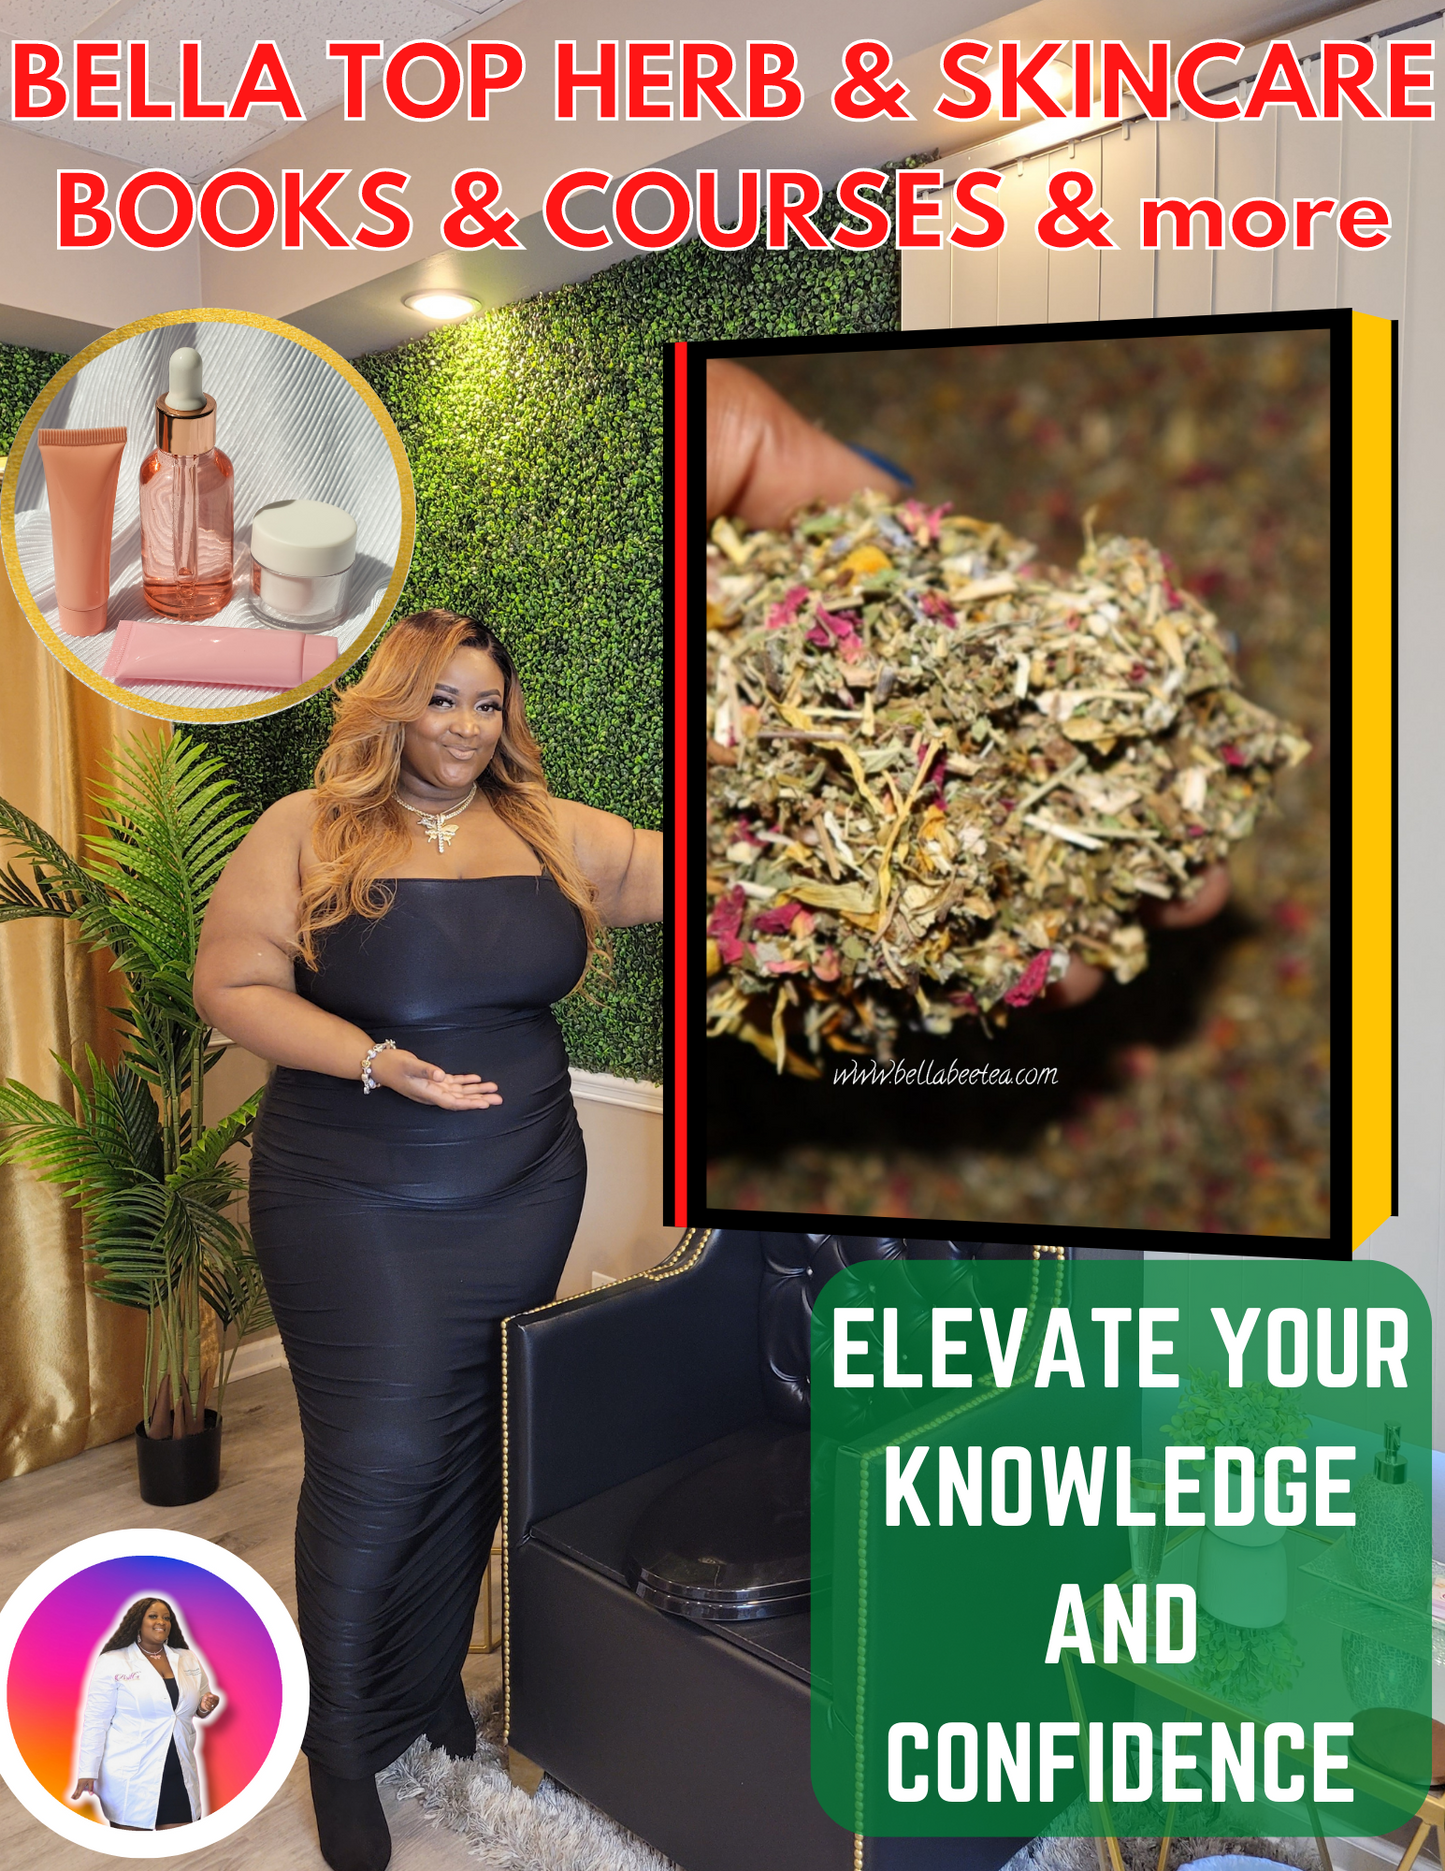 BELLA TOP 20 HERB & SKIN CARE BOOKS, COURSES & more | Become an Herbalist | Formulate Herbal products | Make Skincare products